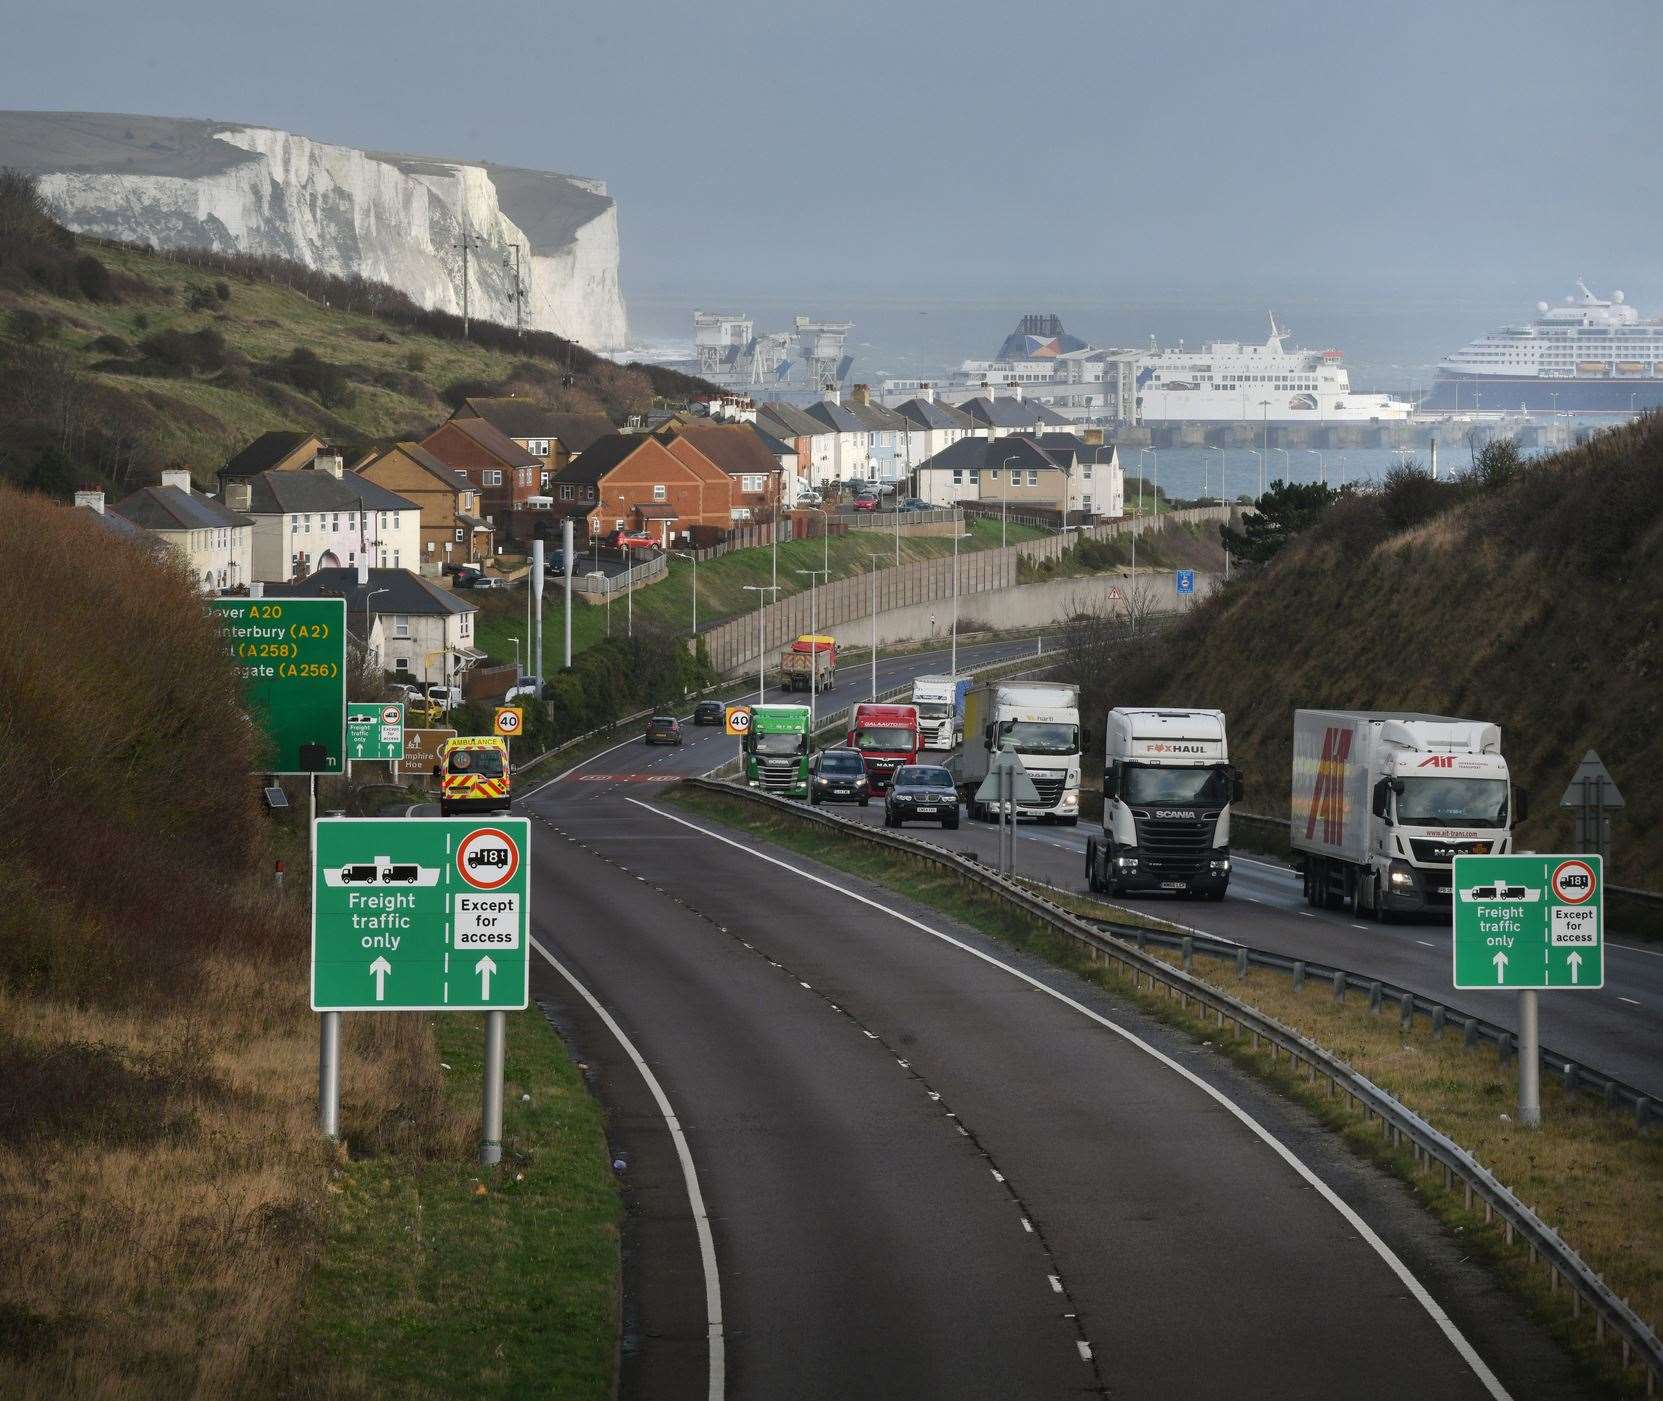 The Port of Dover is open again after travel restrictions for freight traffic were lifted